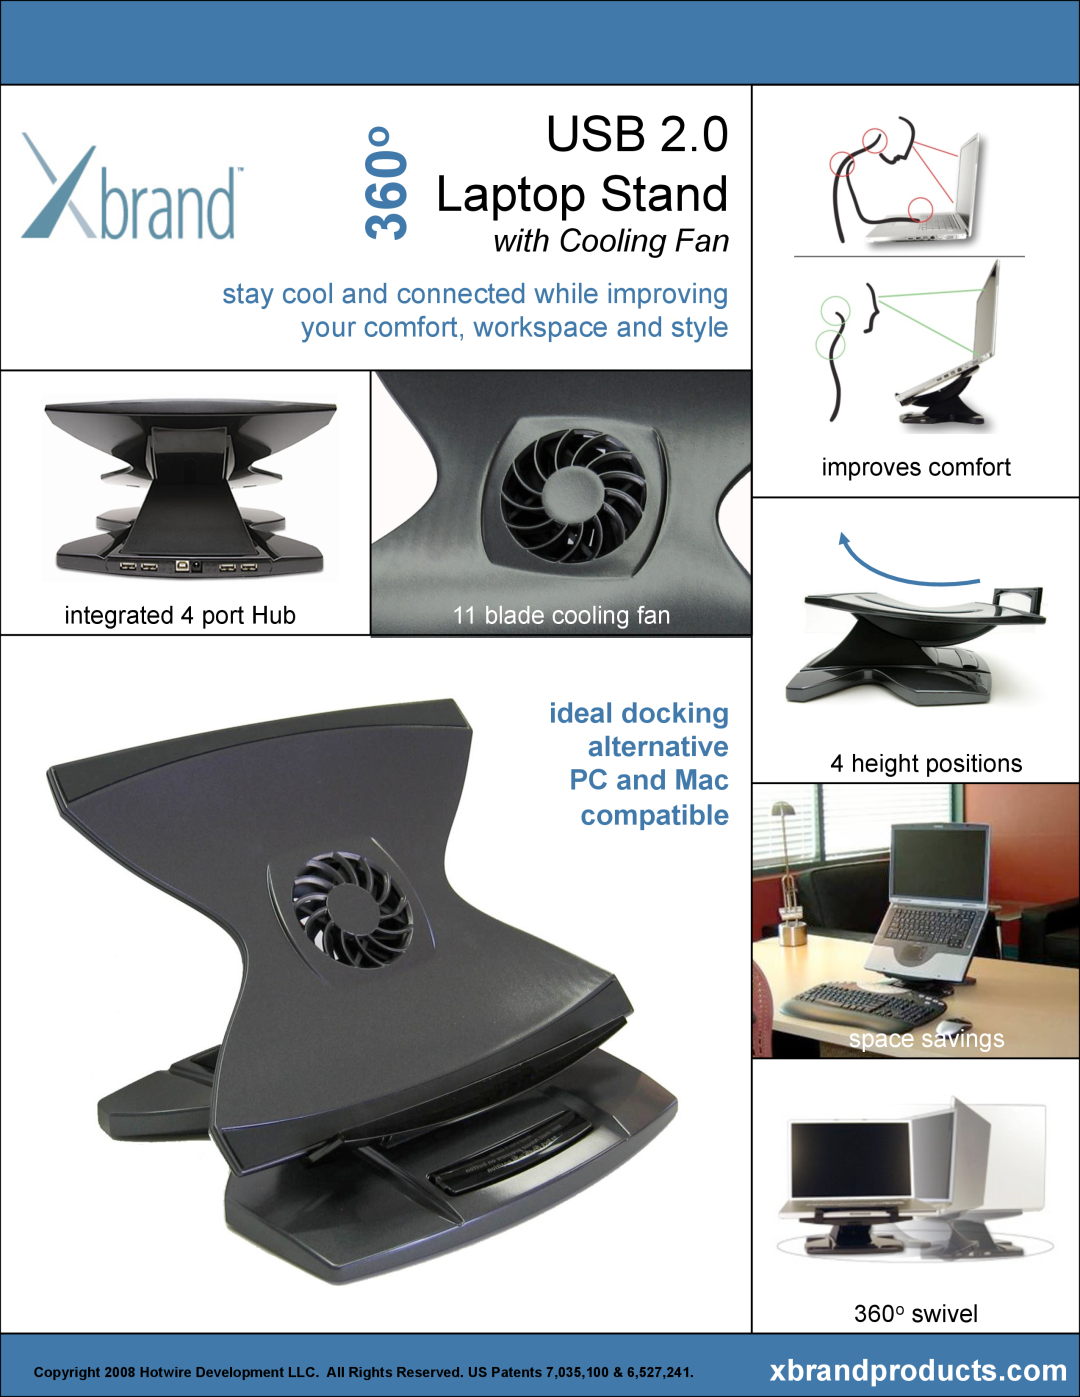 Xbrand XB-1002F-XX manual Laptop Stand, with Cooling Fan, ideal docking alternative PC and Mac compatible, space savings 